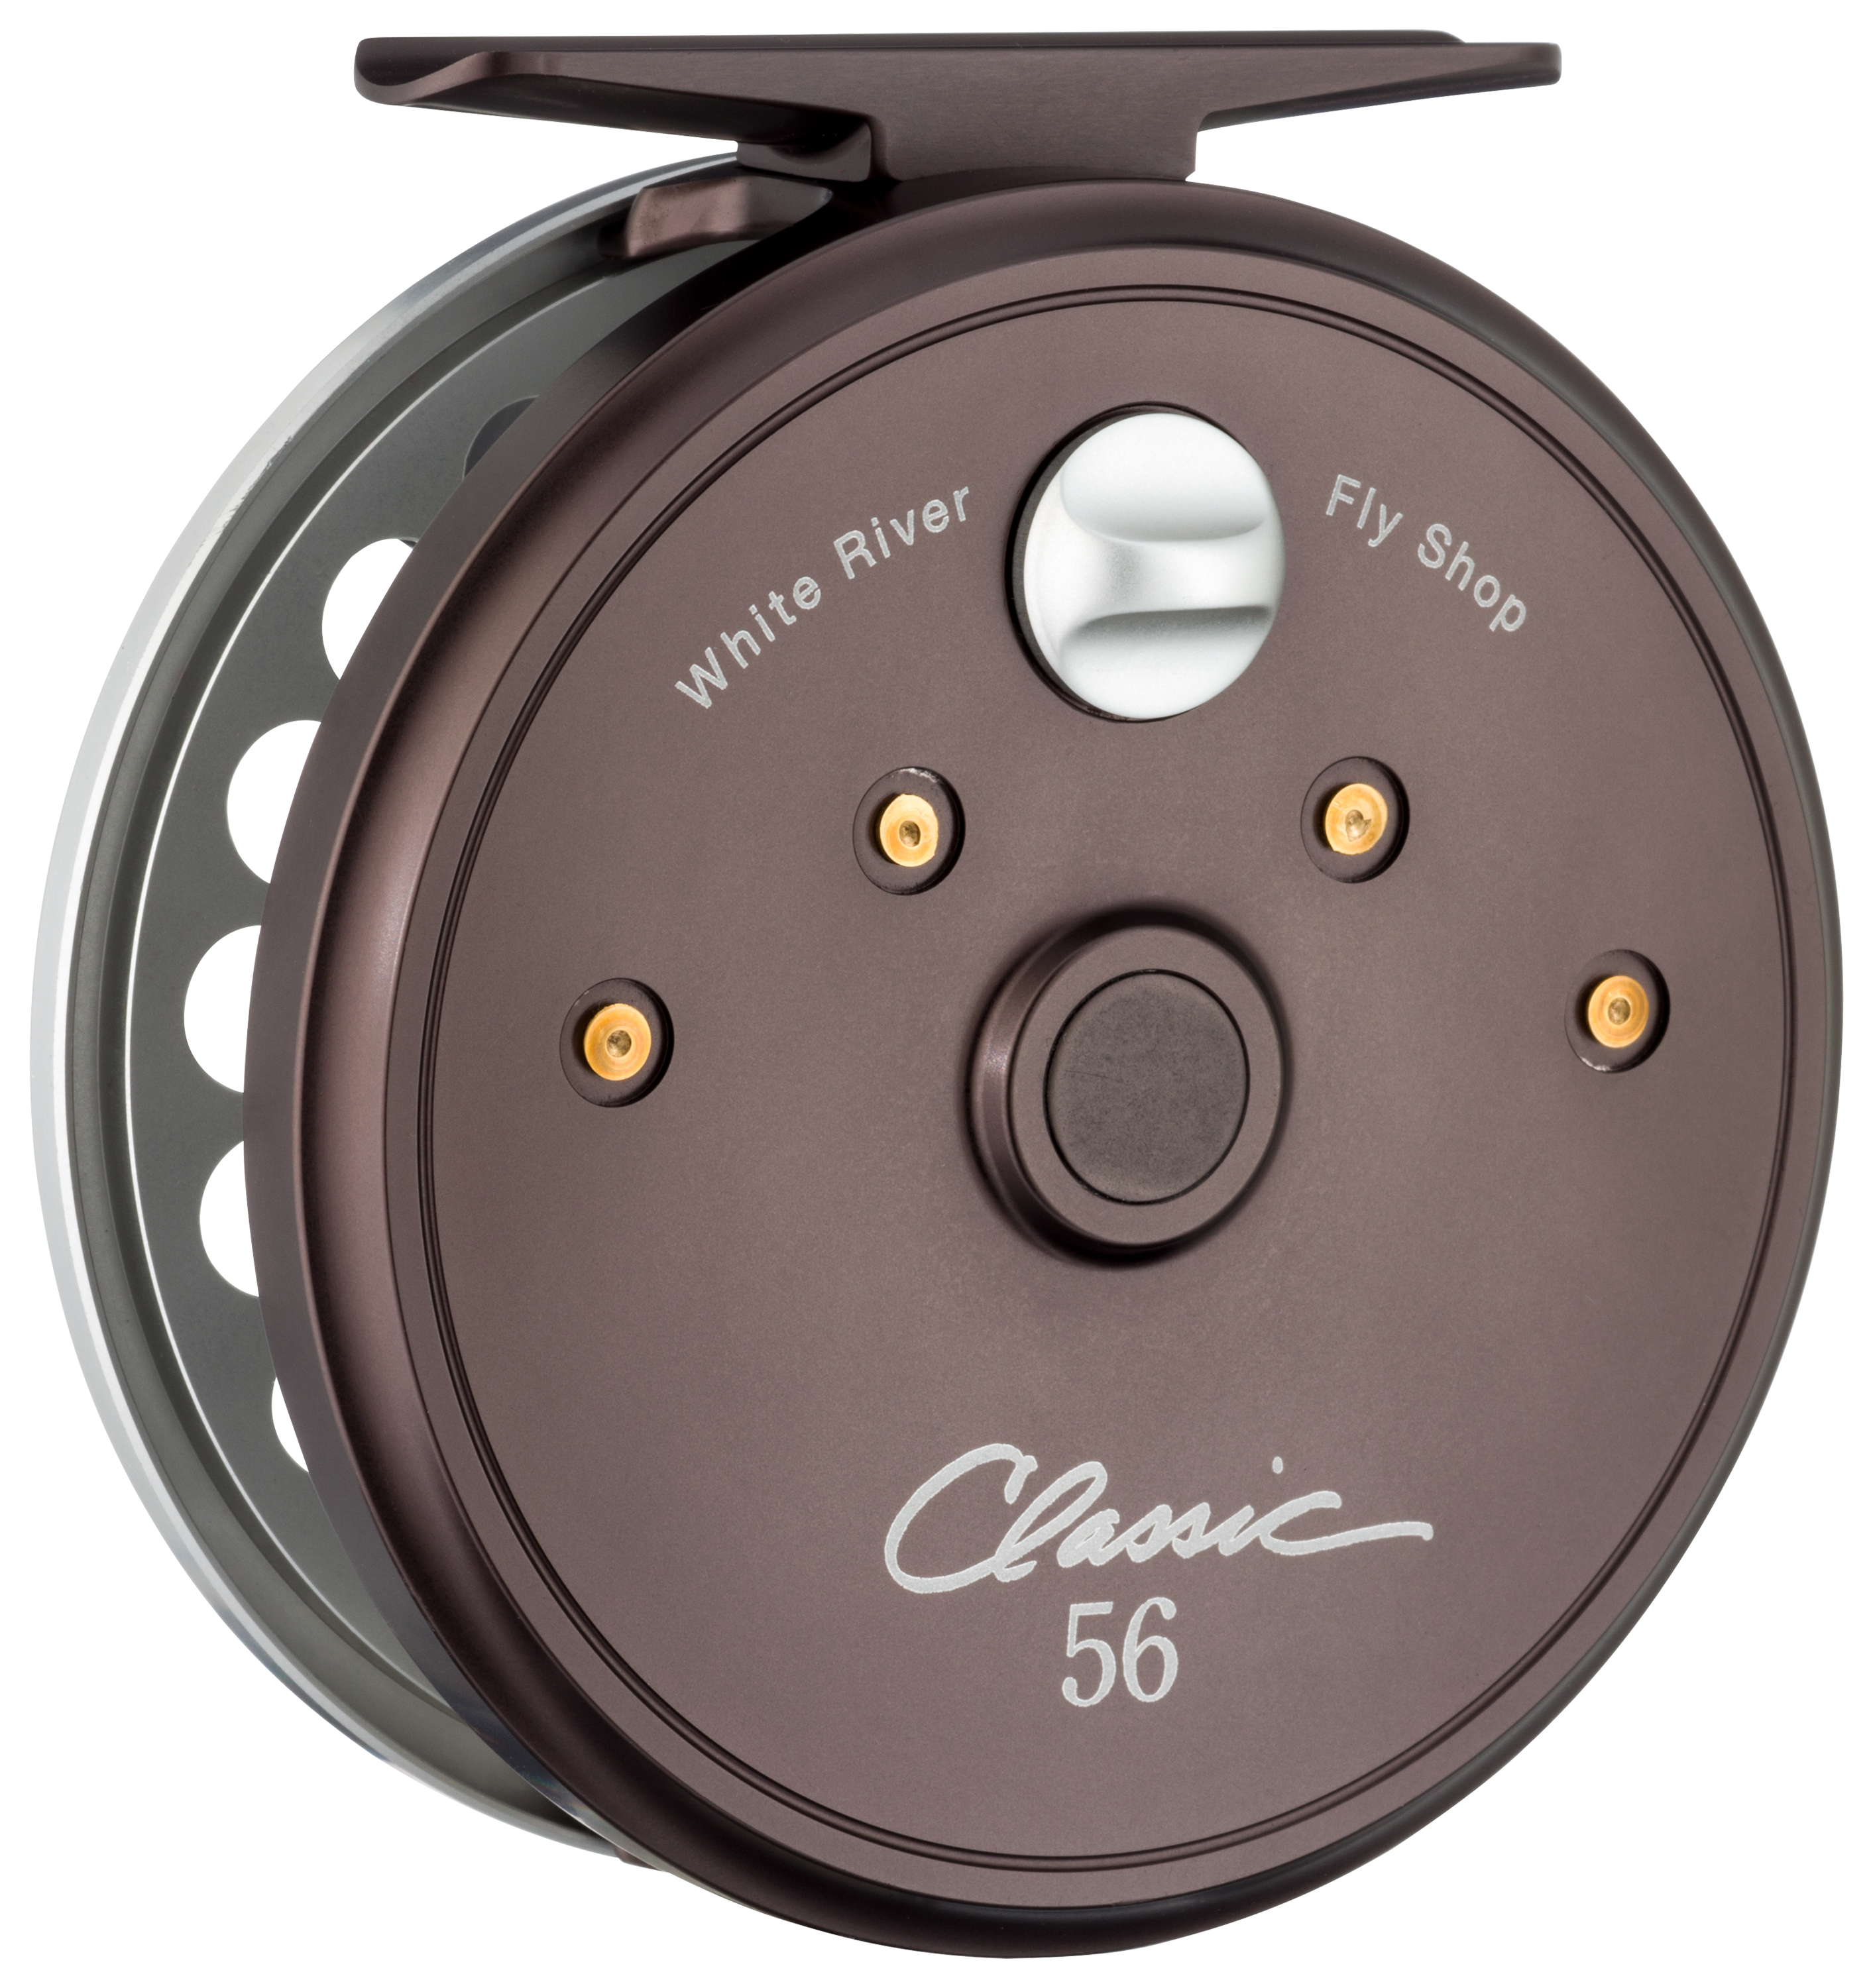 White River Fly Shop Classic Fly Reel - 5/6